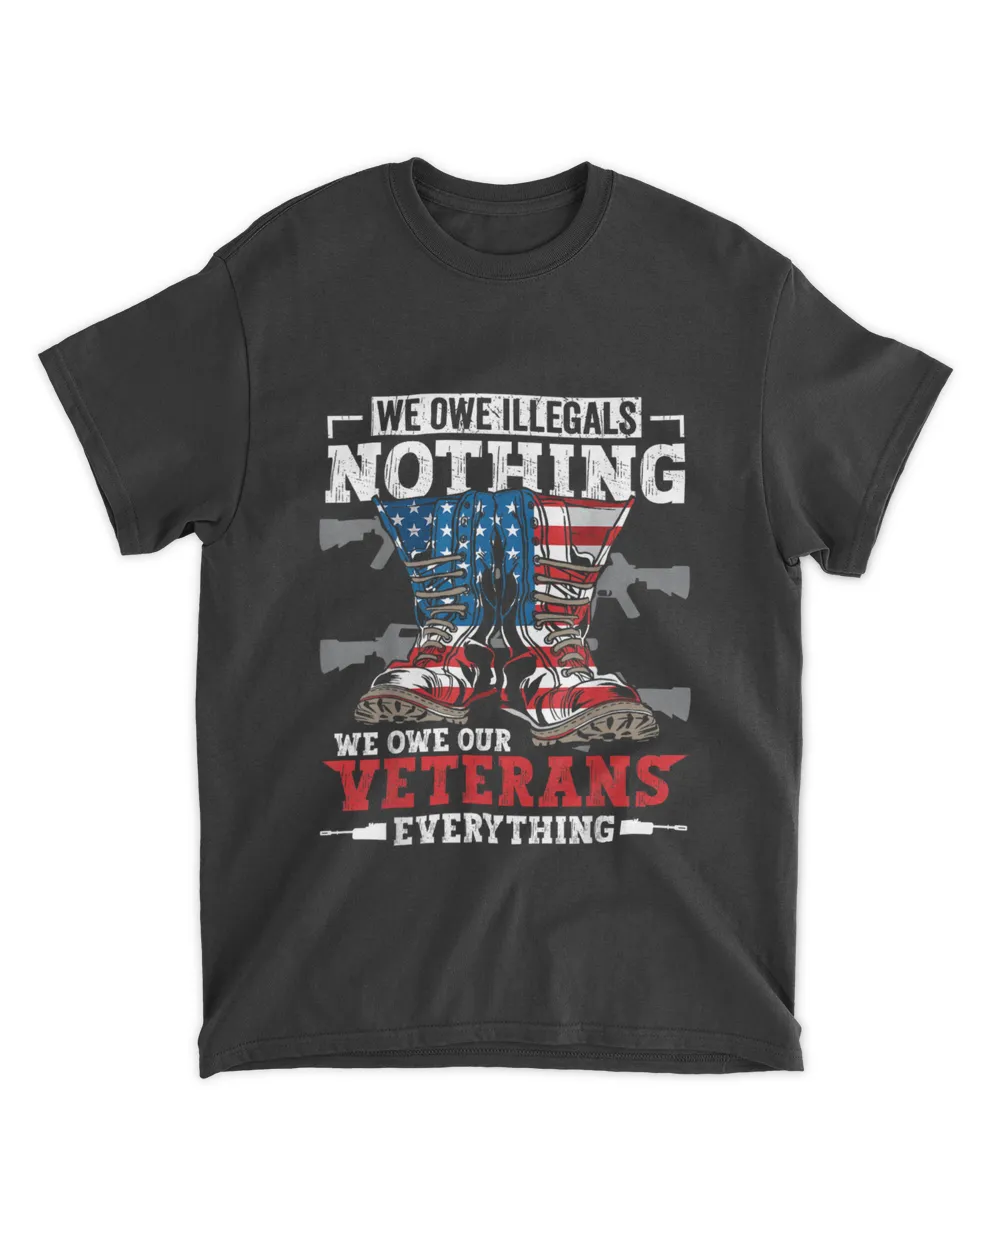 We Owe Illegals Nothing We Owe Our Veterans Everything